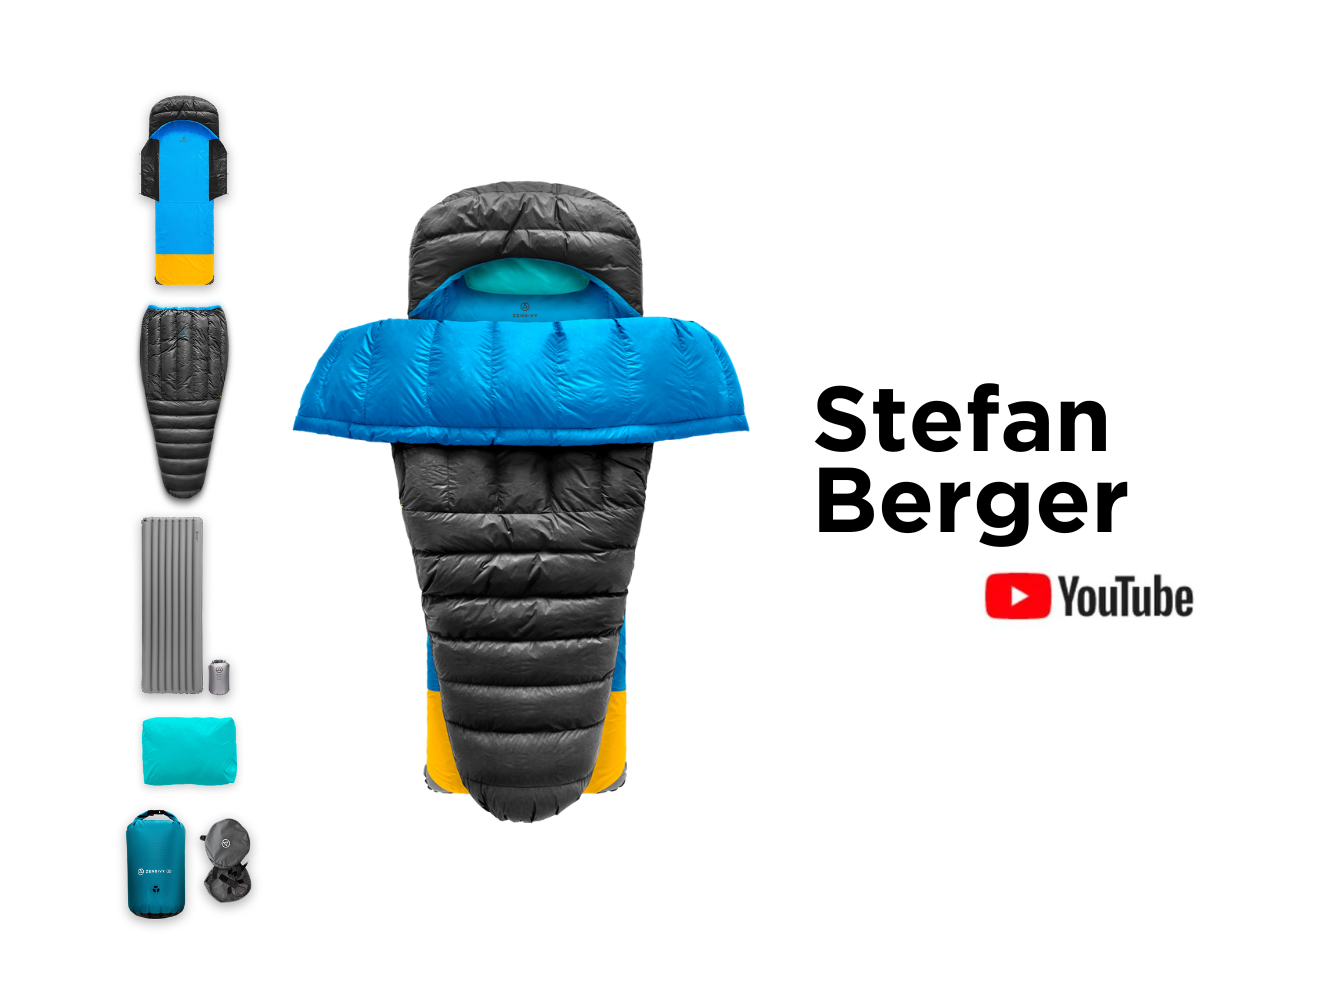 WATCH: Stefan Berger "The sleeping bag system of the future"